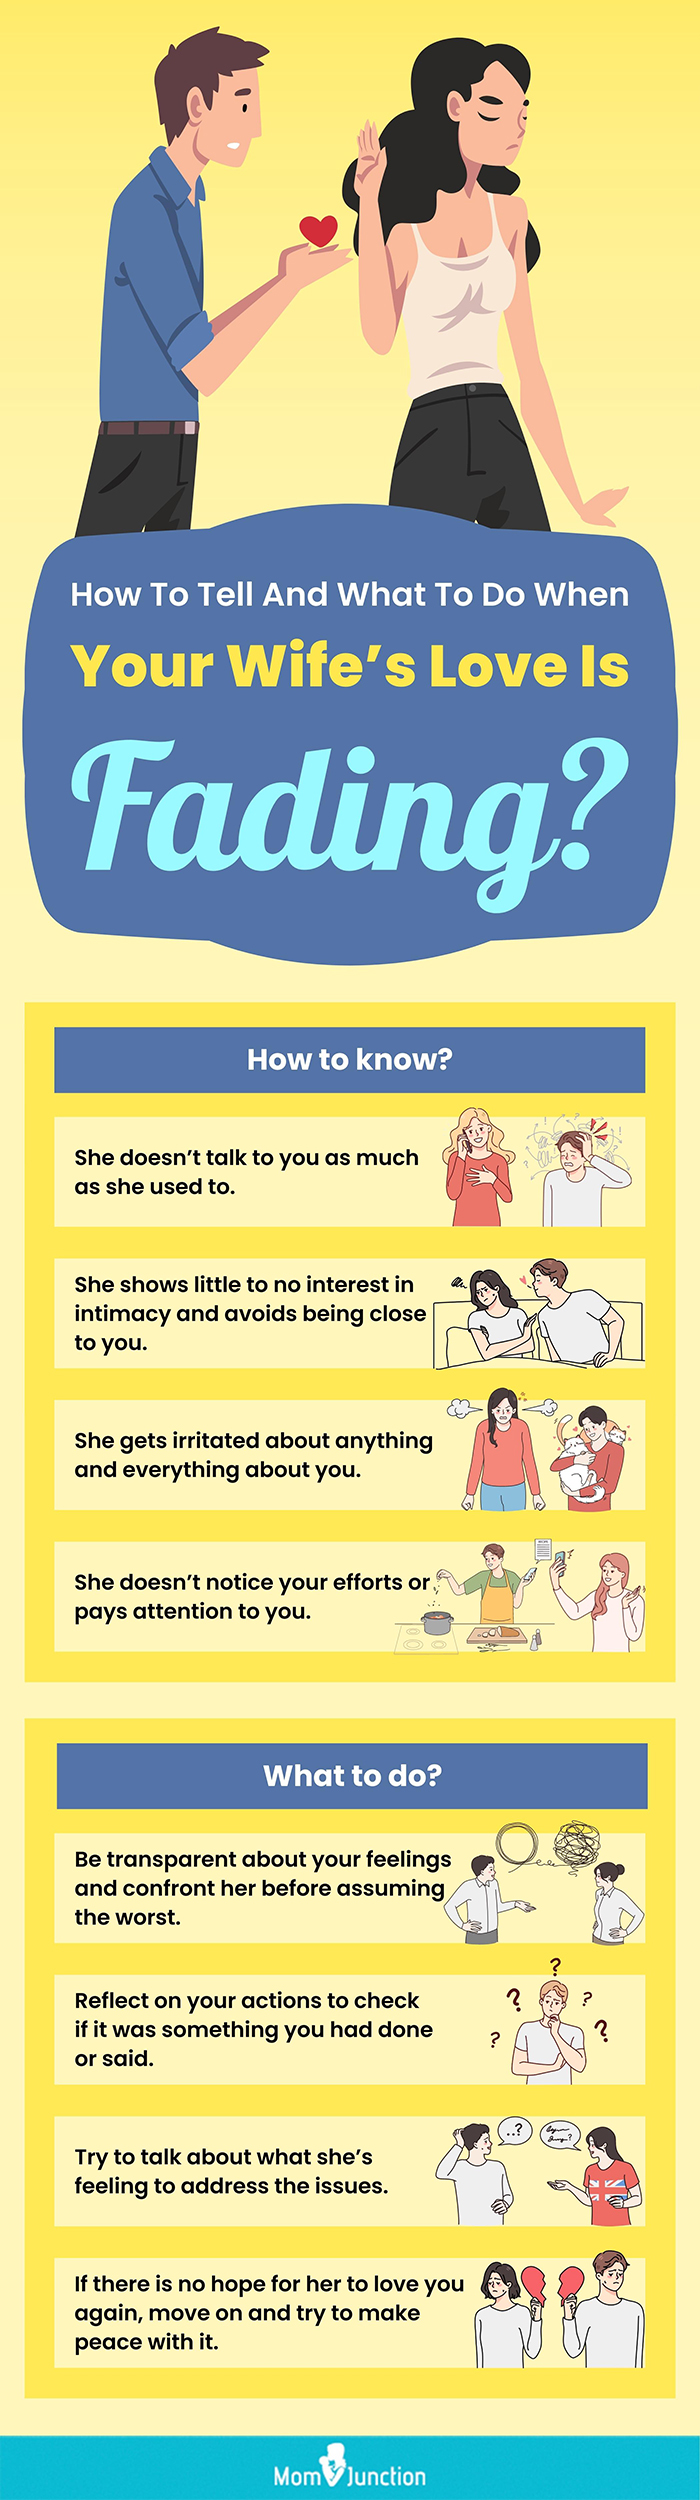 ways to handle your wife’s fading love for you (infographic)